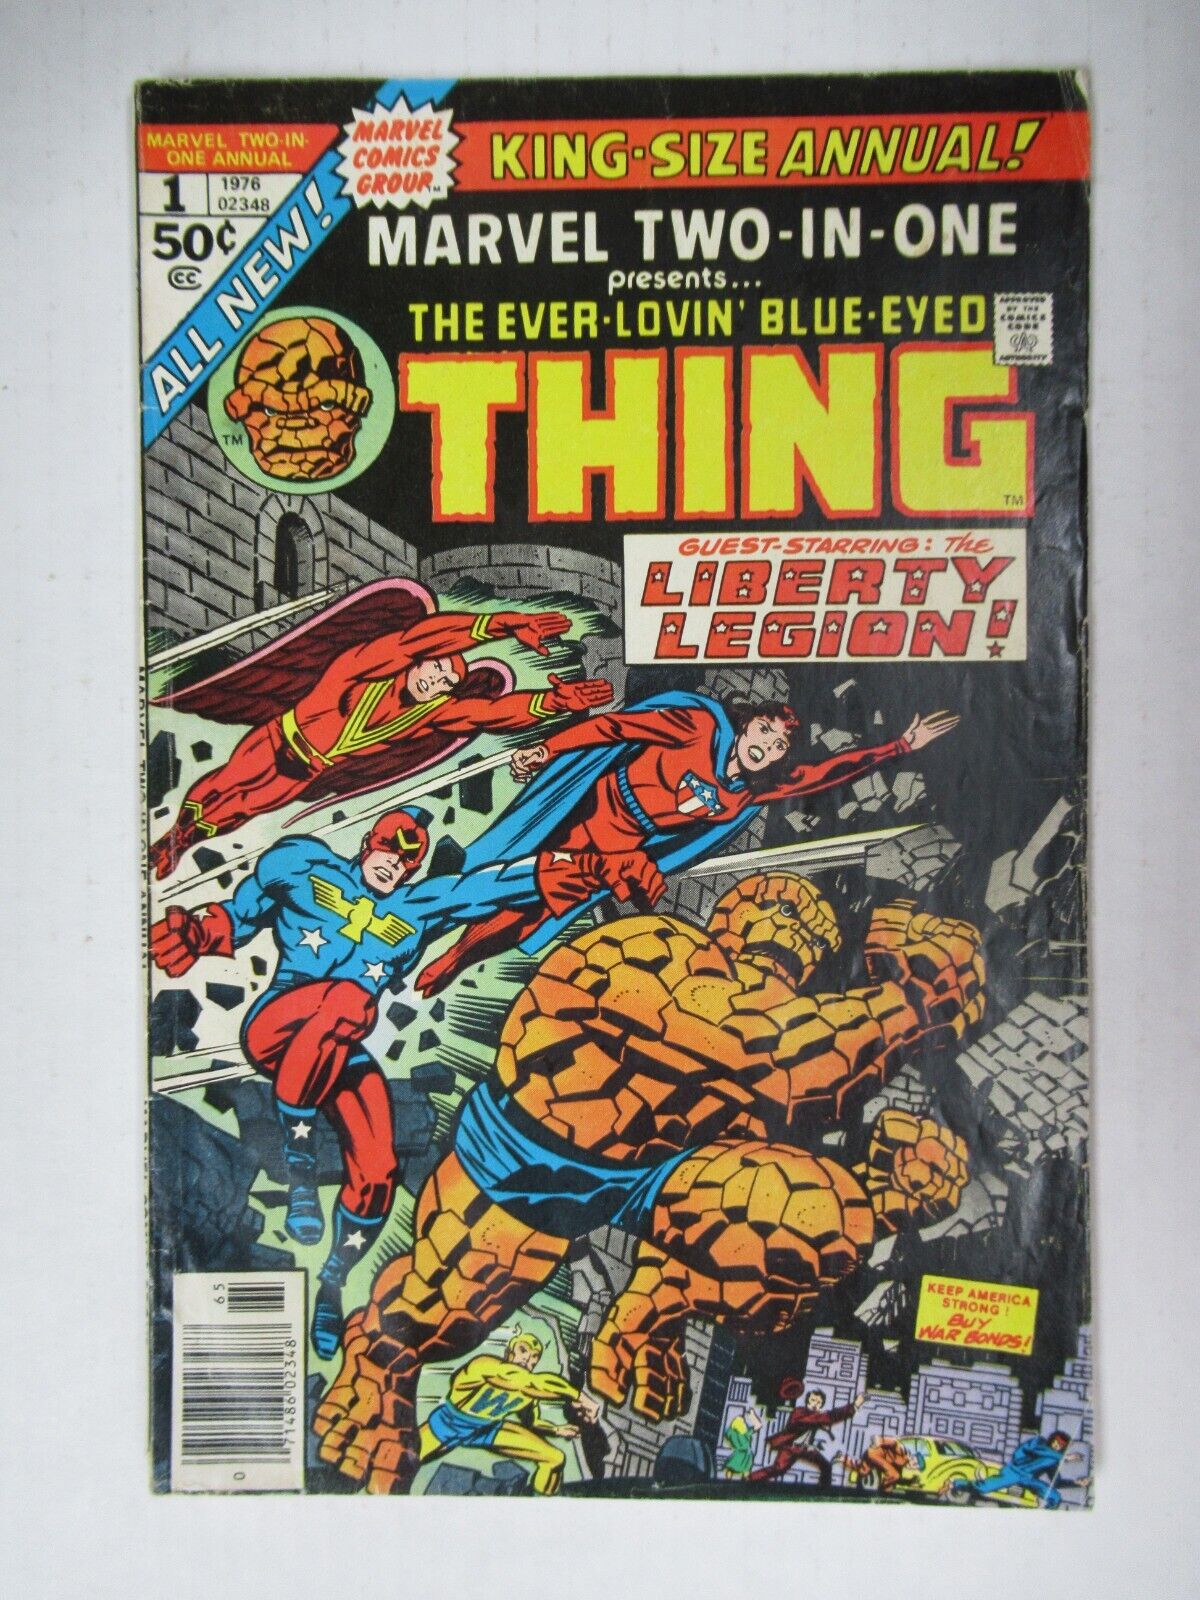 1976 Marvel Comics Marvel Two-In-One King Size Annual #1